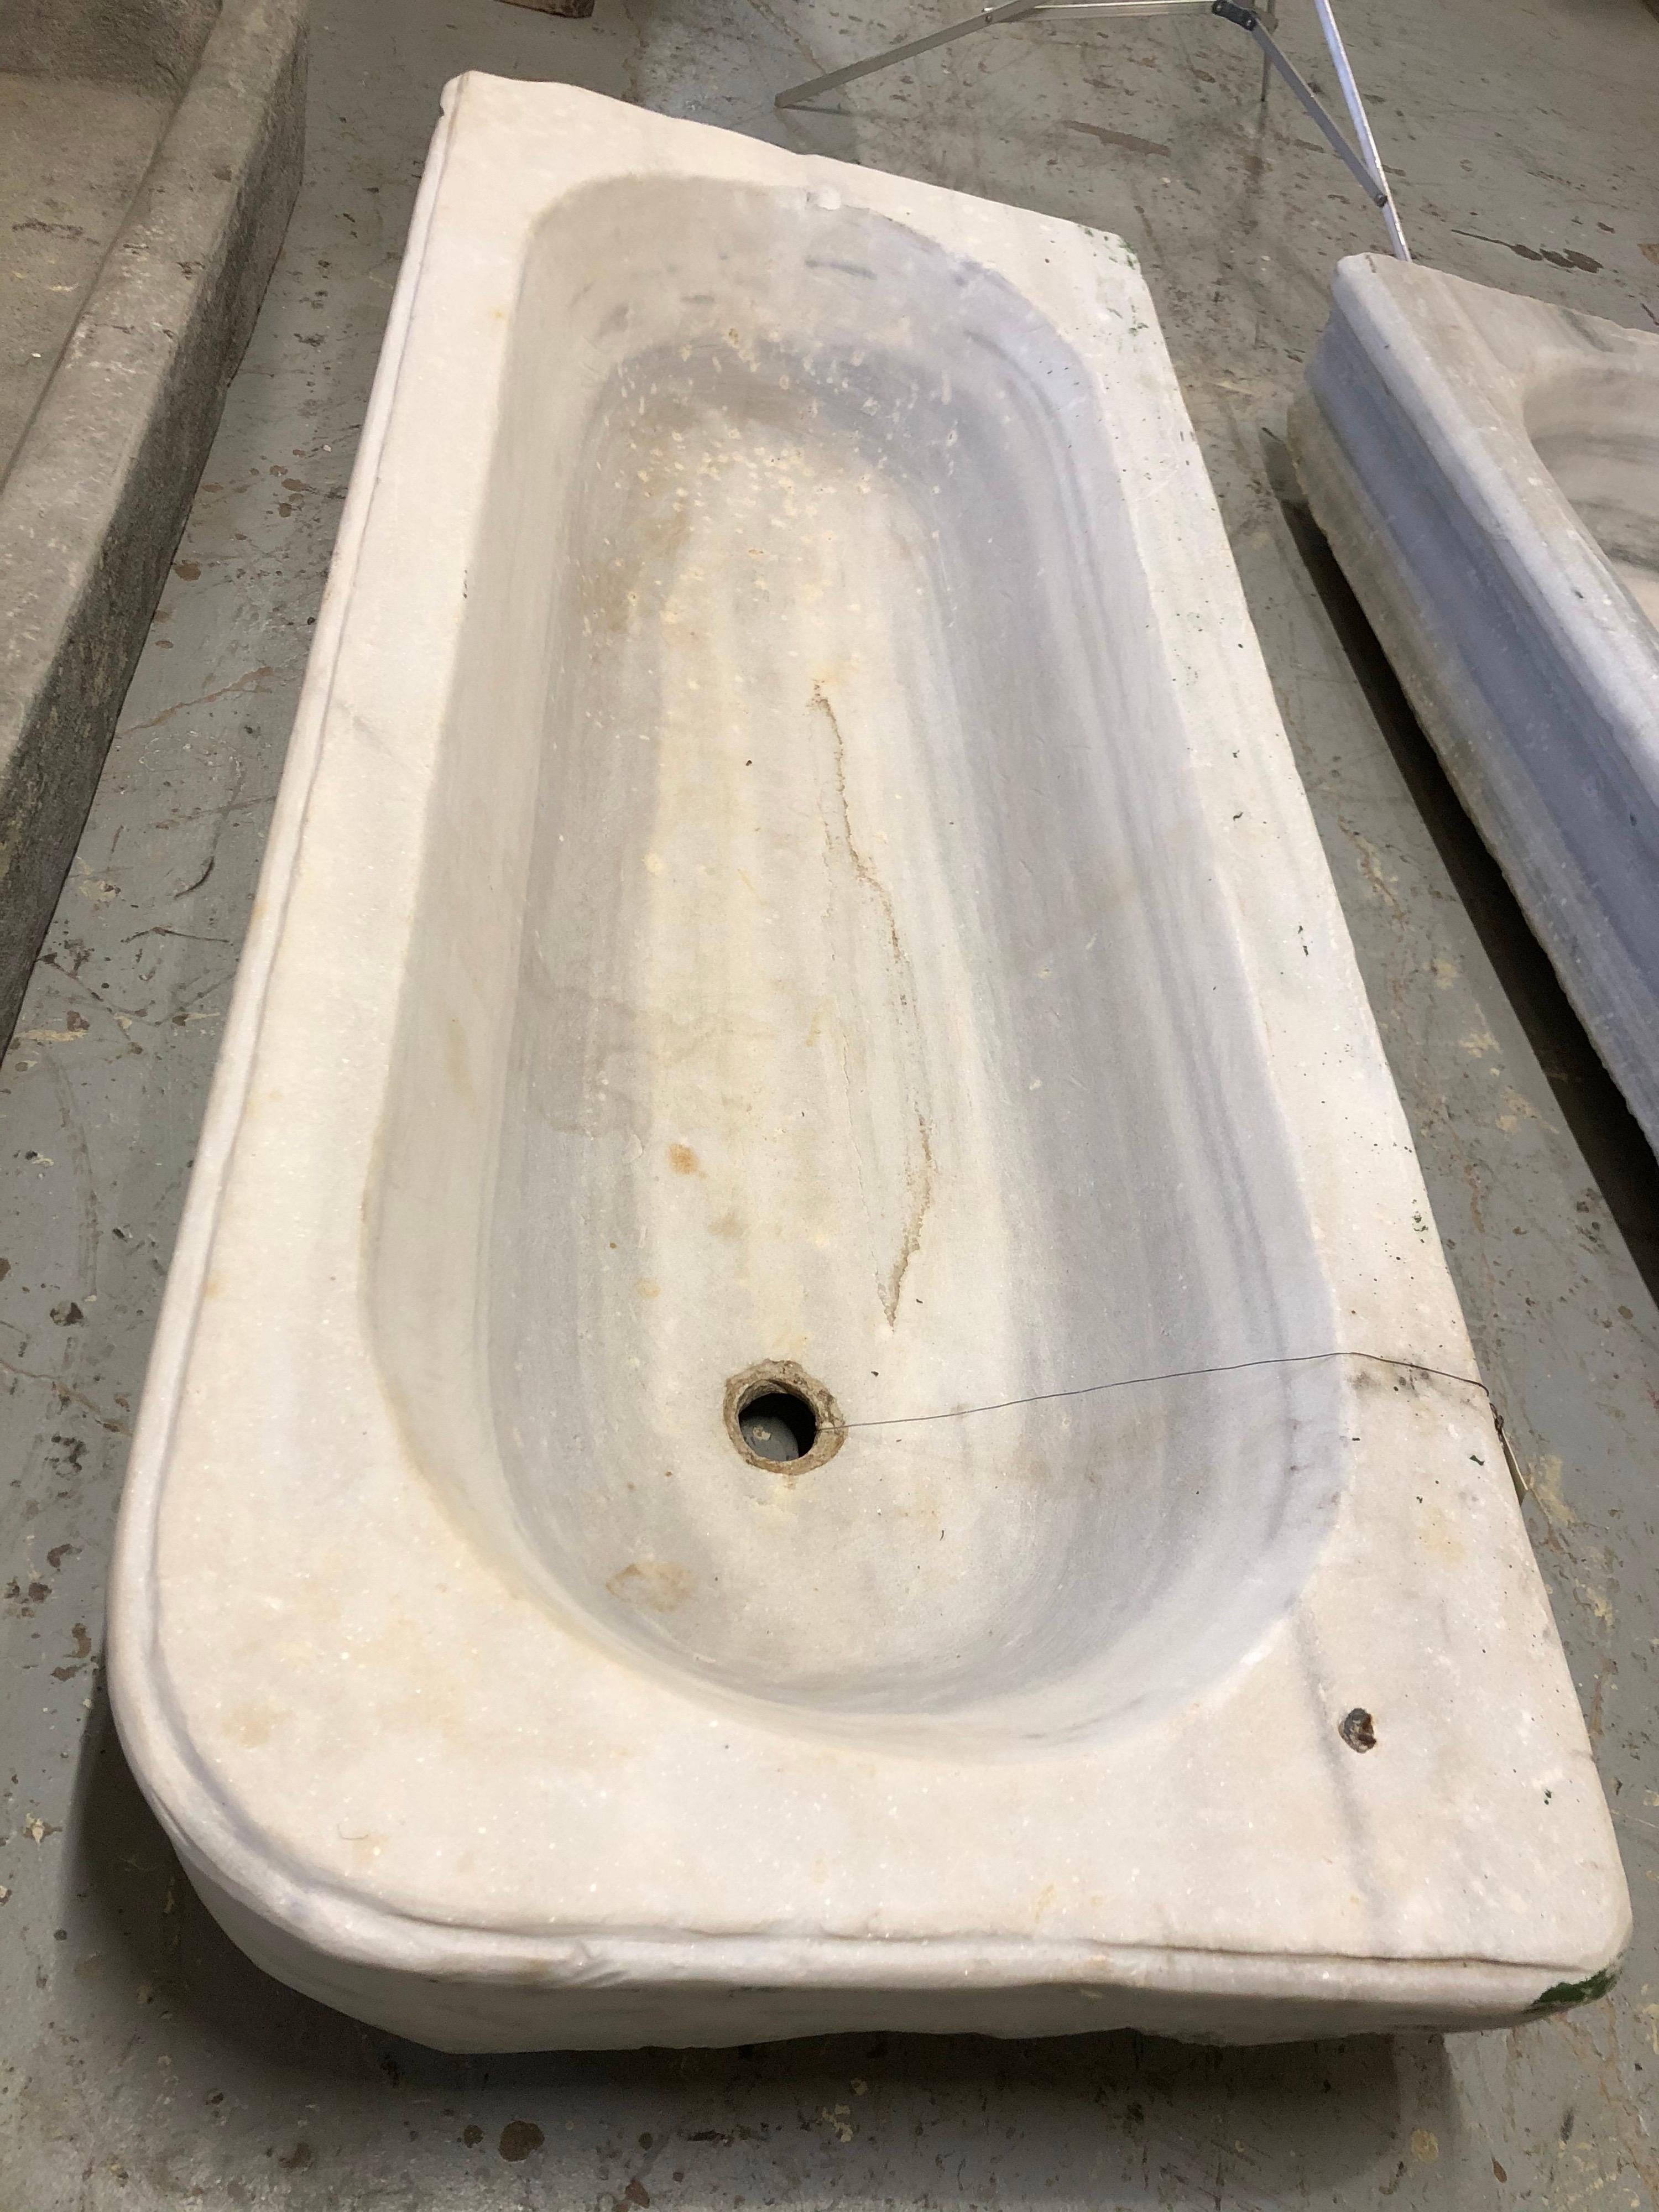 This majestic marble sink origins from Europe, circa 1780.
